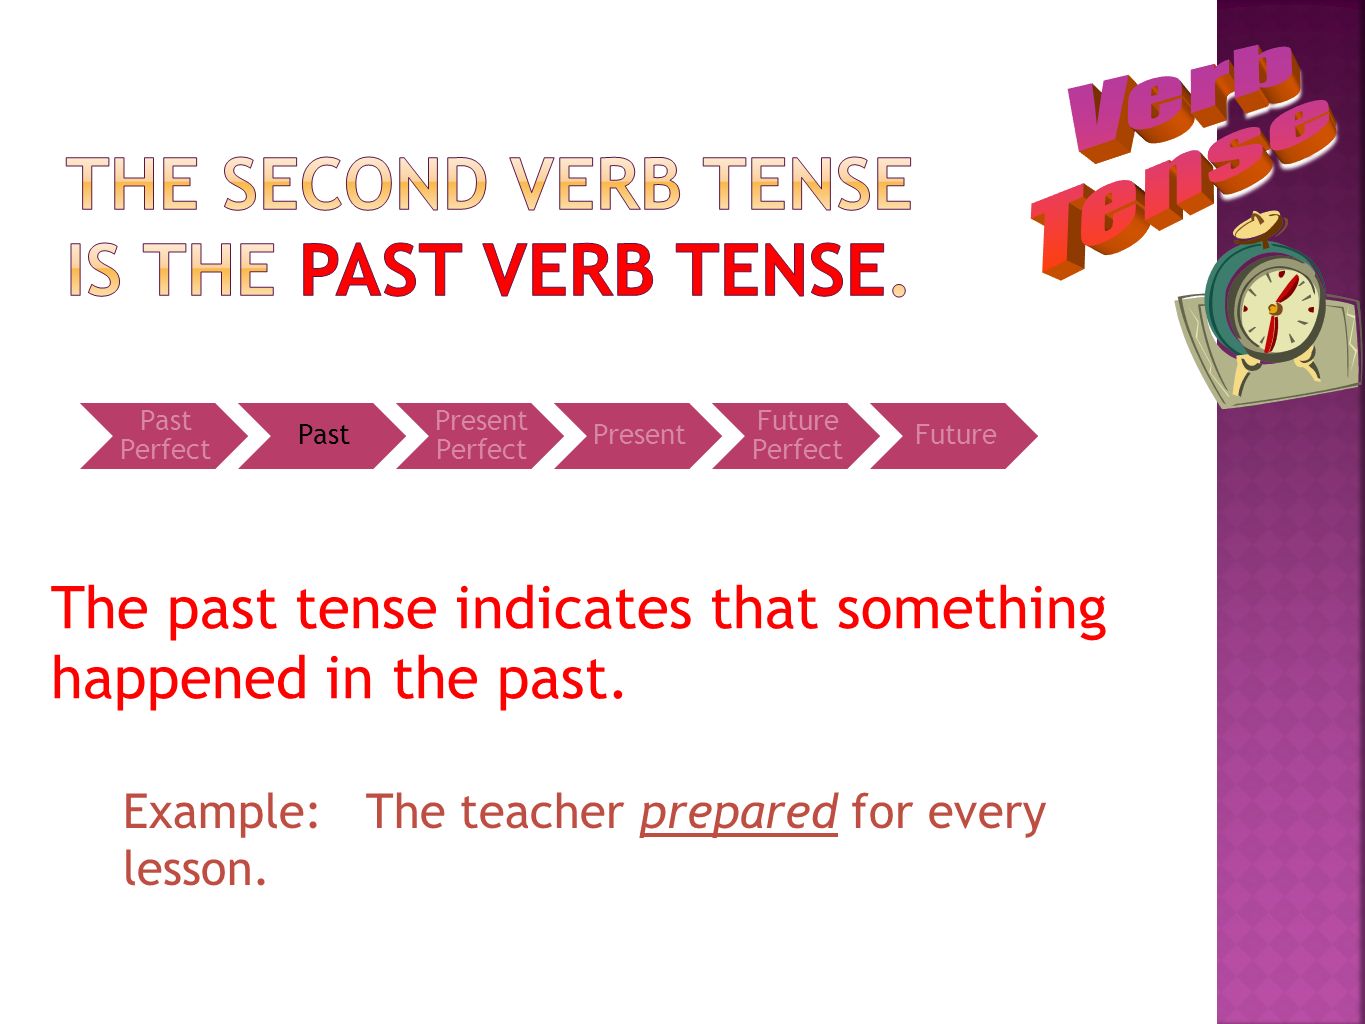 The second verb tense is the past verb tense.